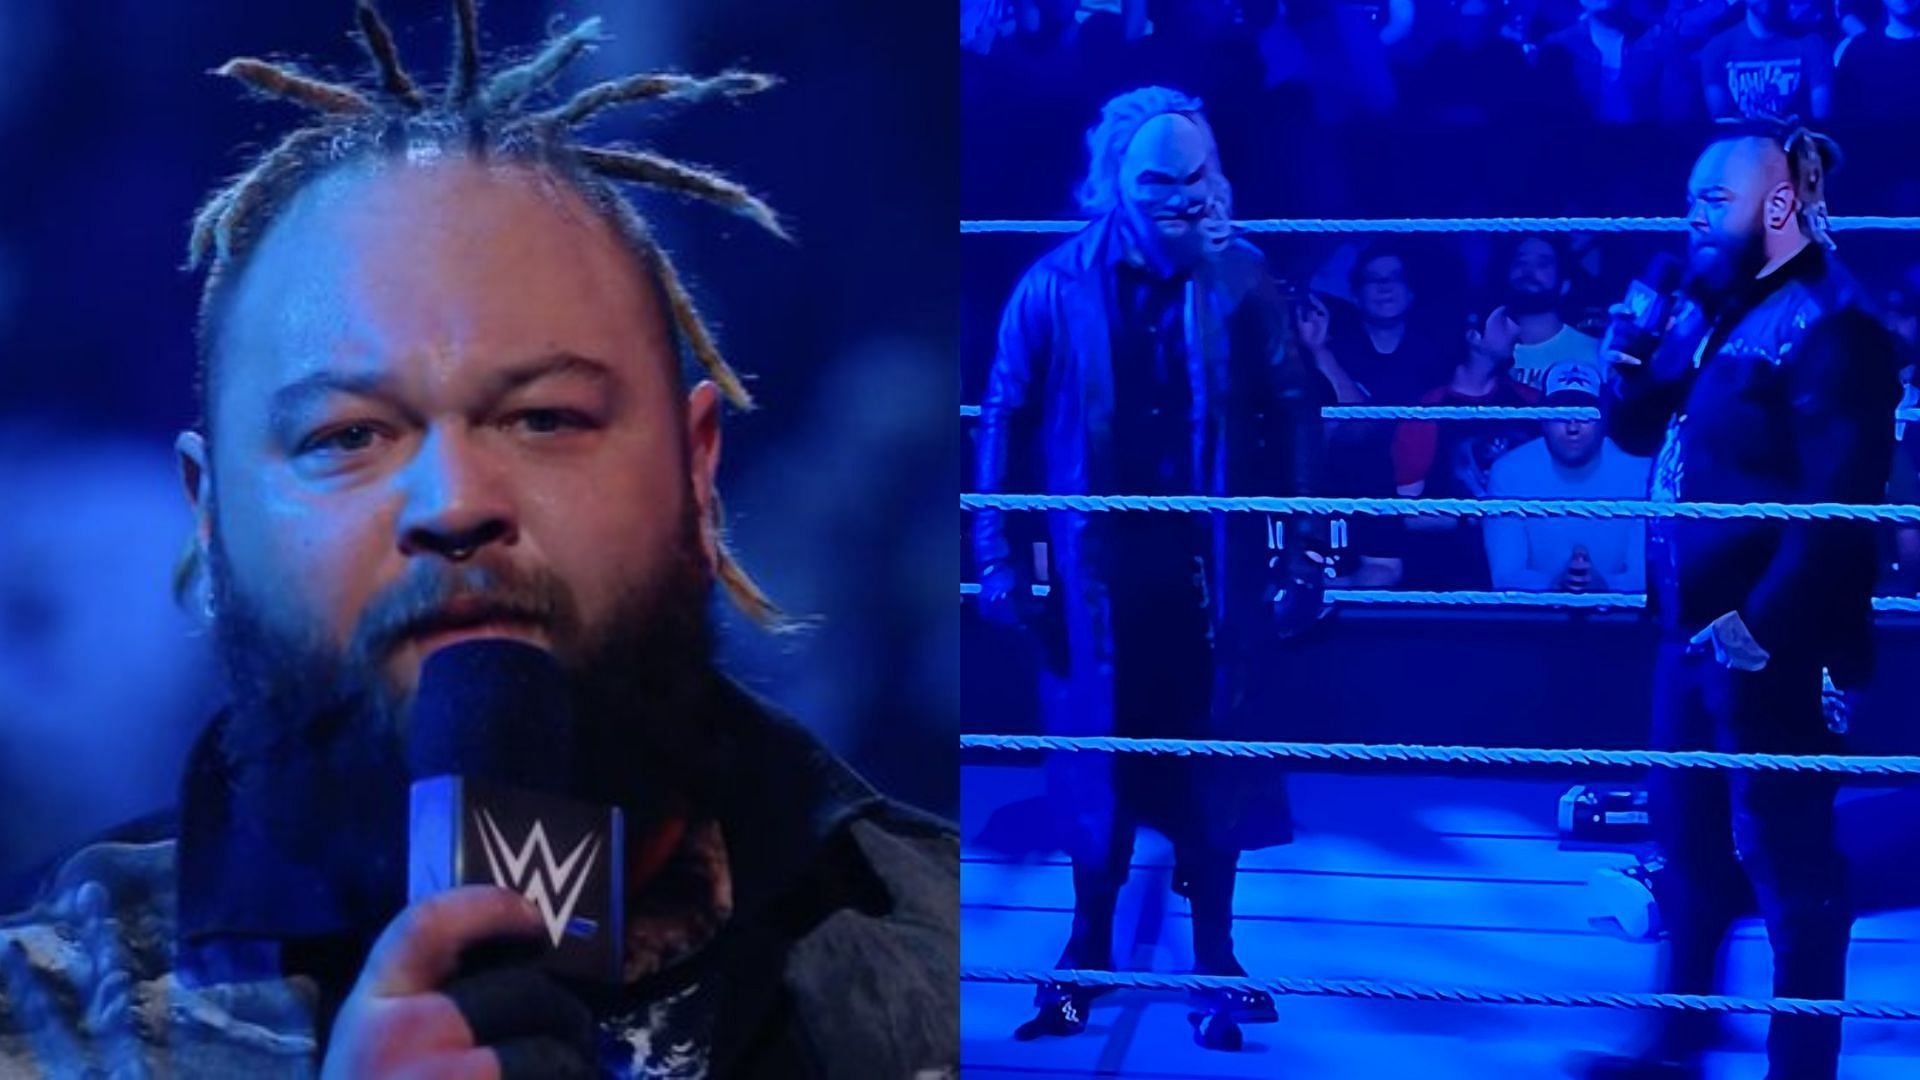 Bray Wyatt was put on notice after his SmackDown segment